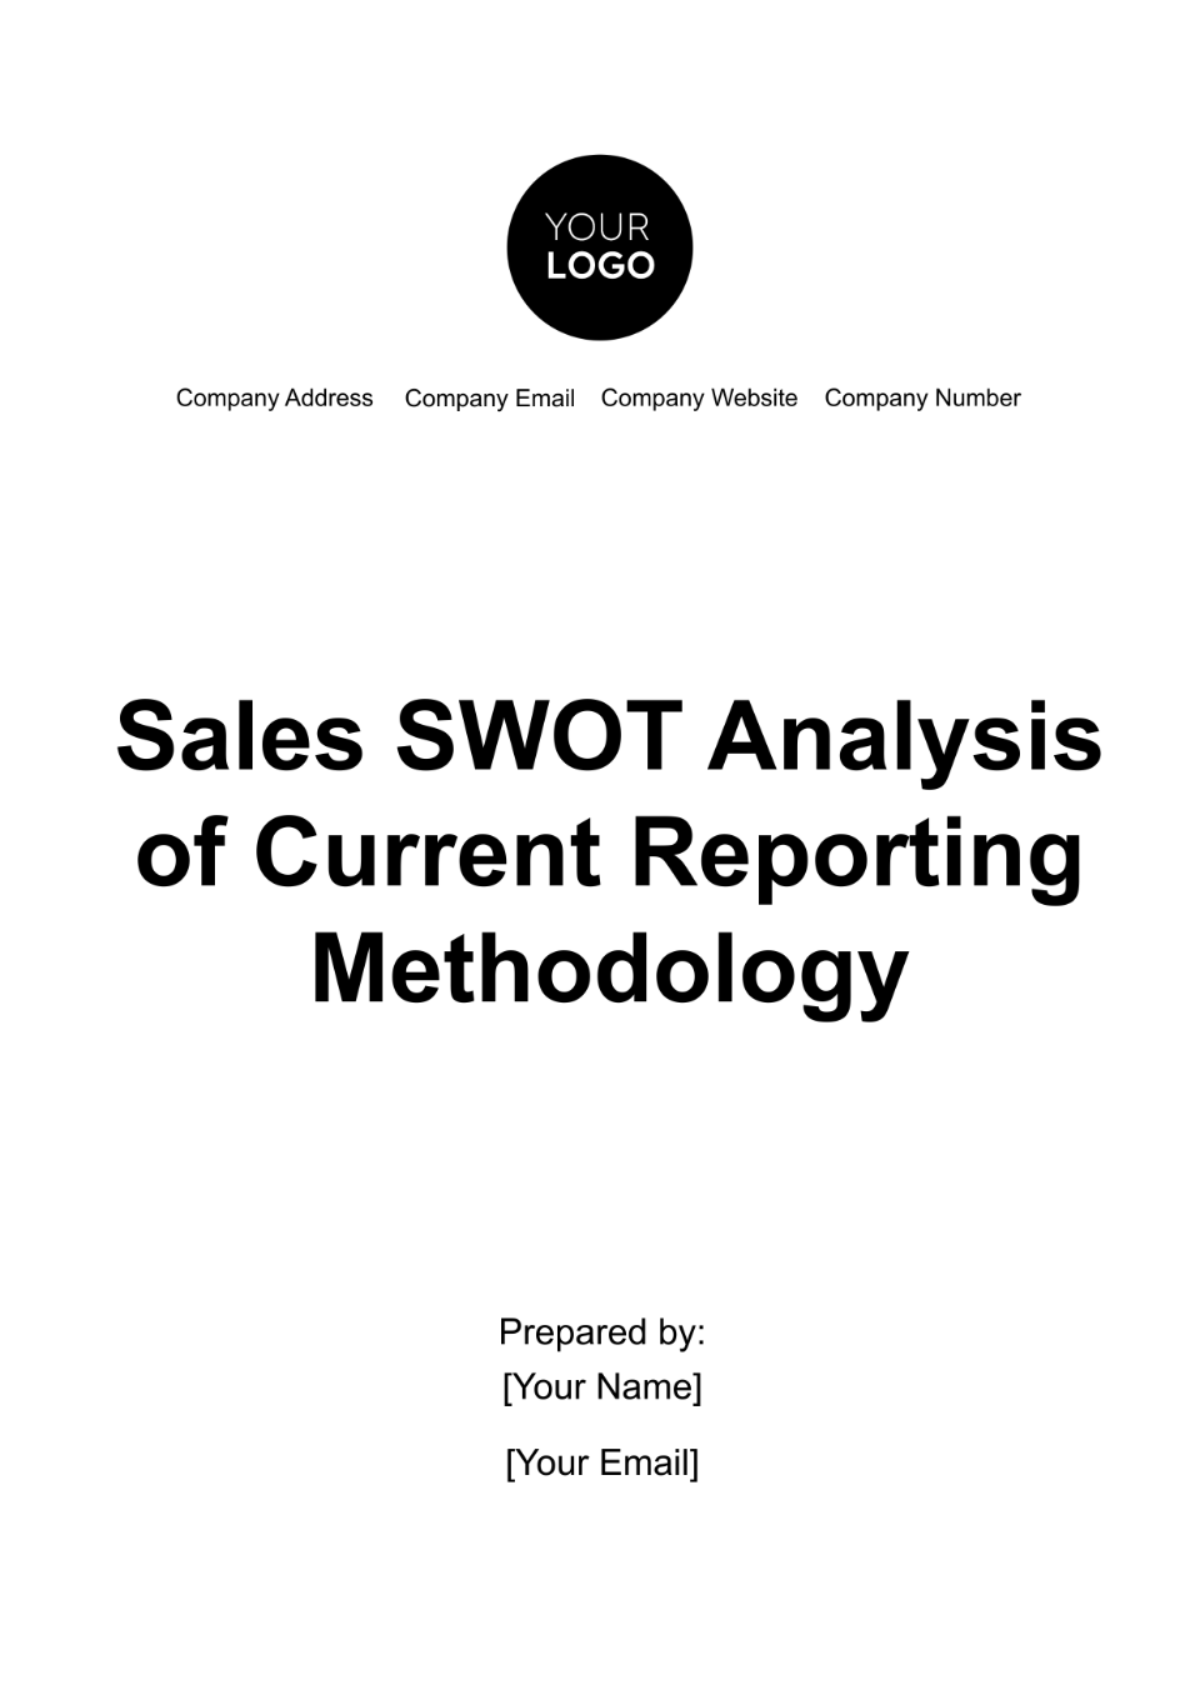 Free Sales SWOT Analysis of Current Reporting Methodology Template